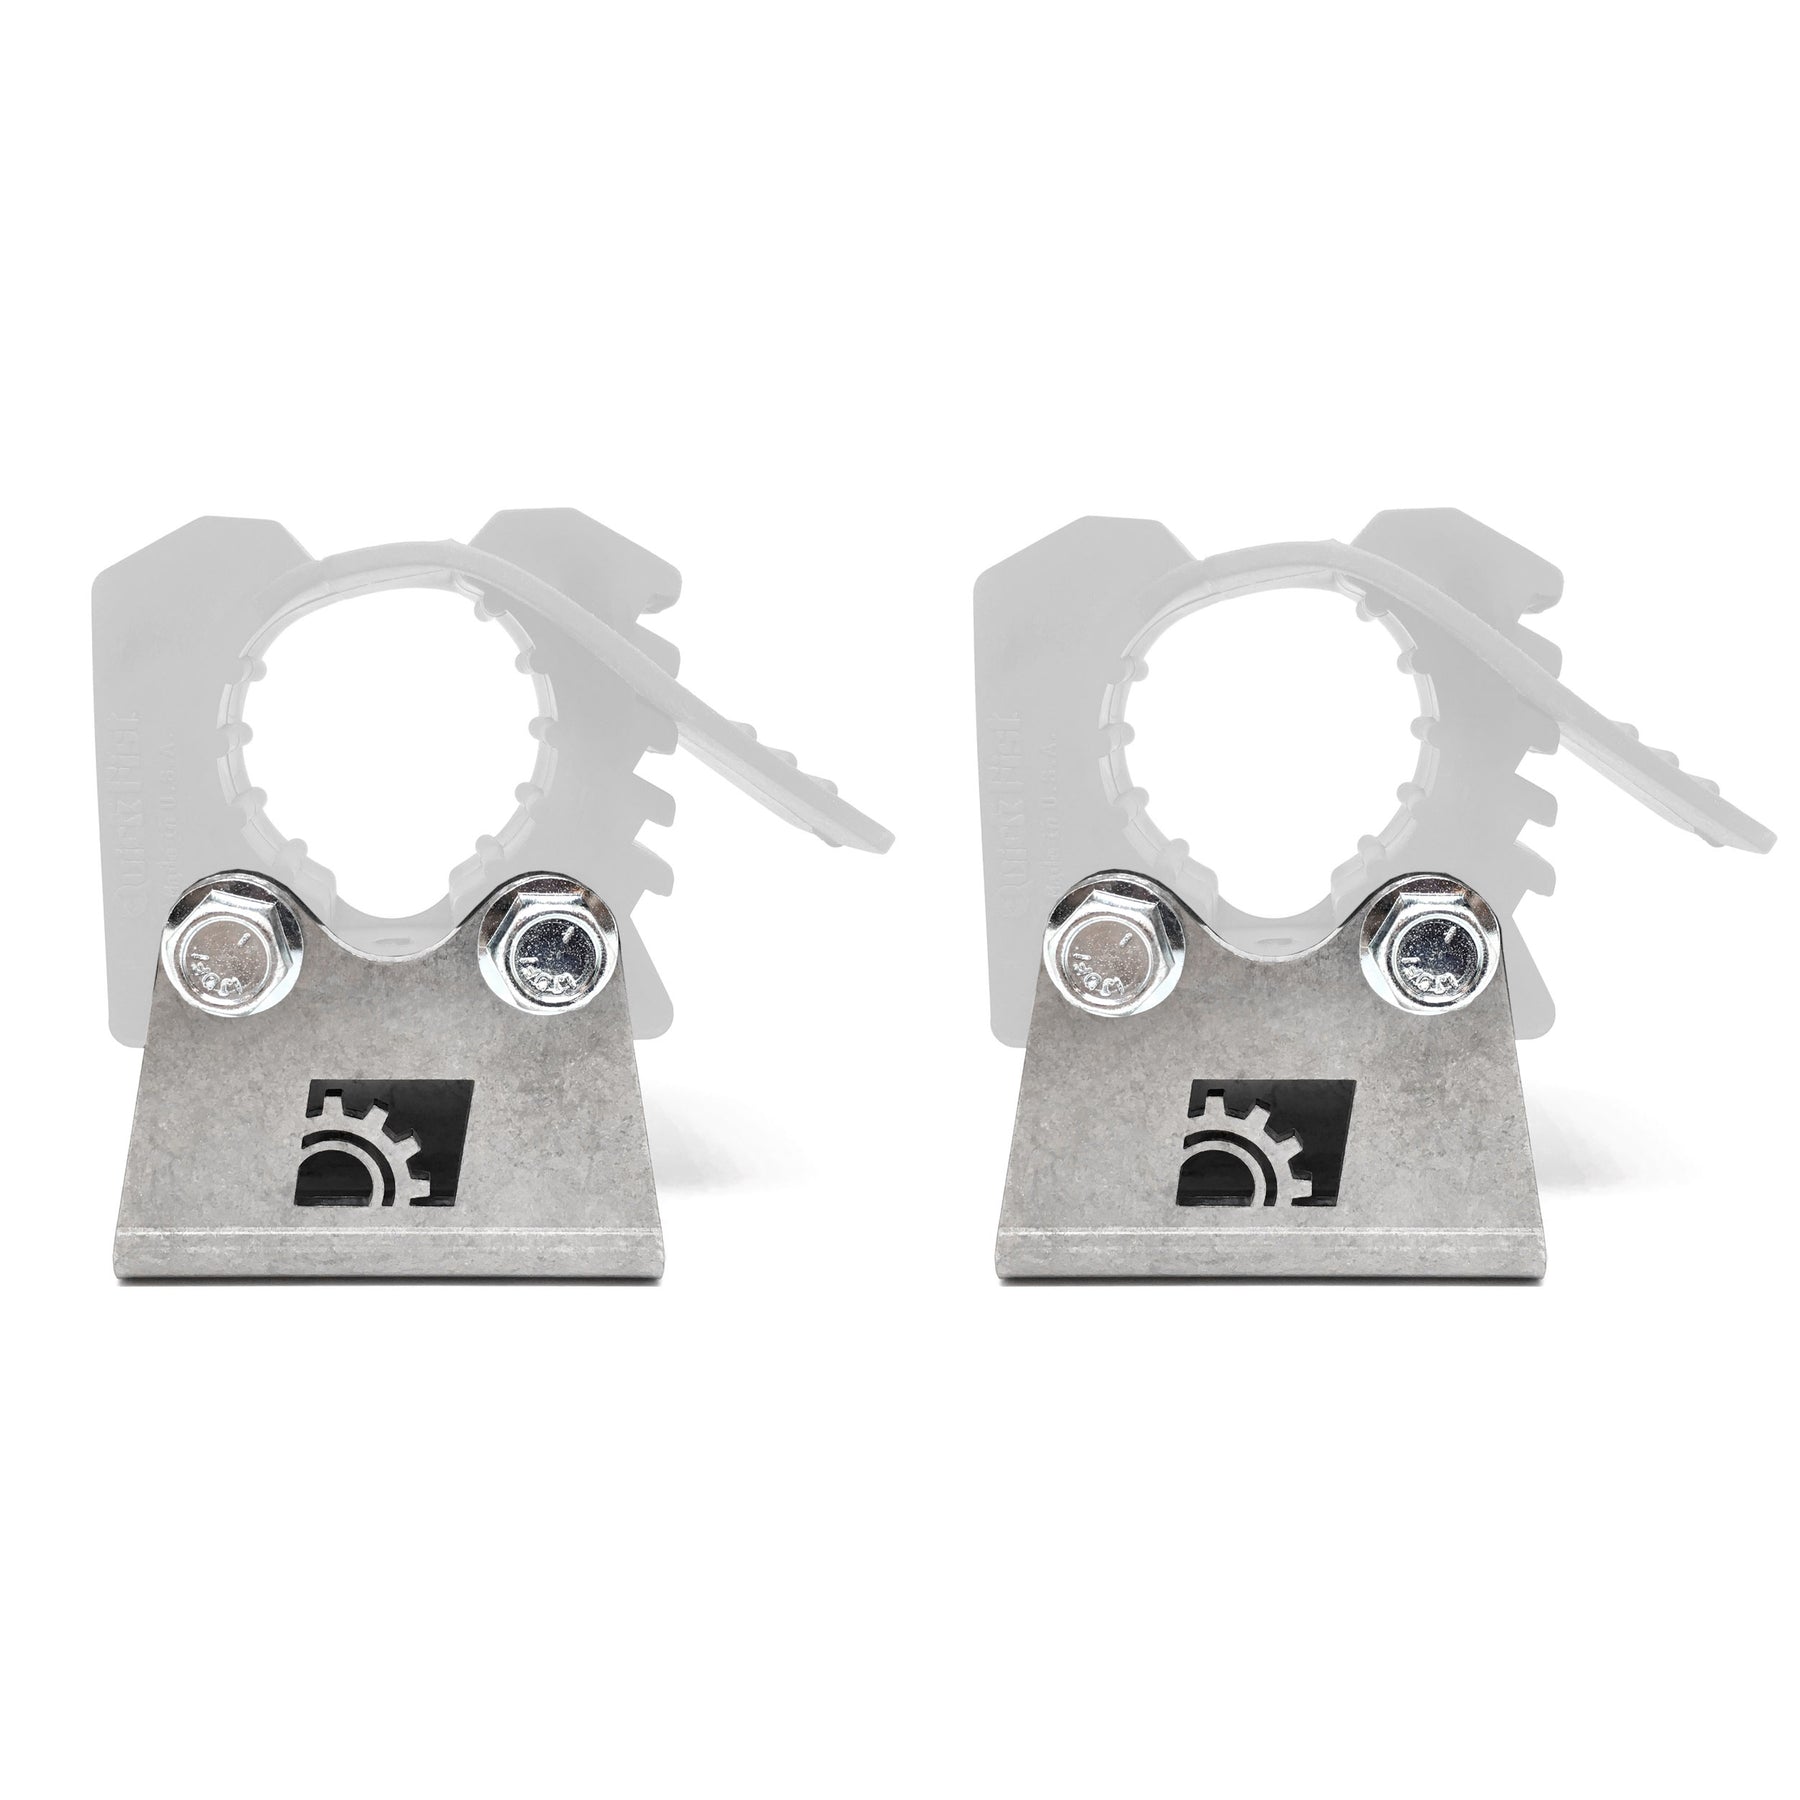 BuiltRight Industries 104005 Riser Mount (Pair) - Includes 1in-2.25in Clamps